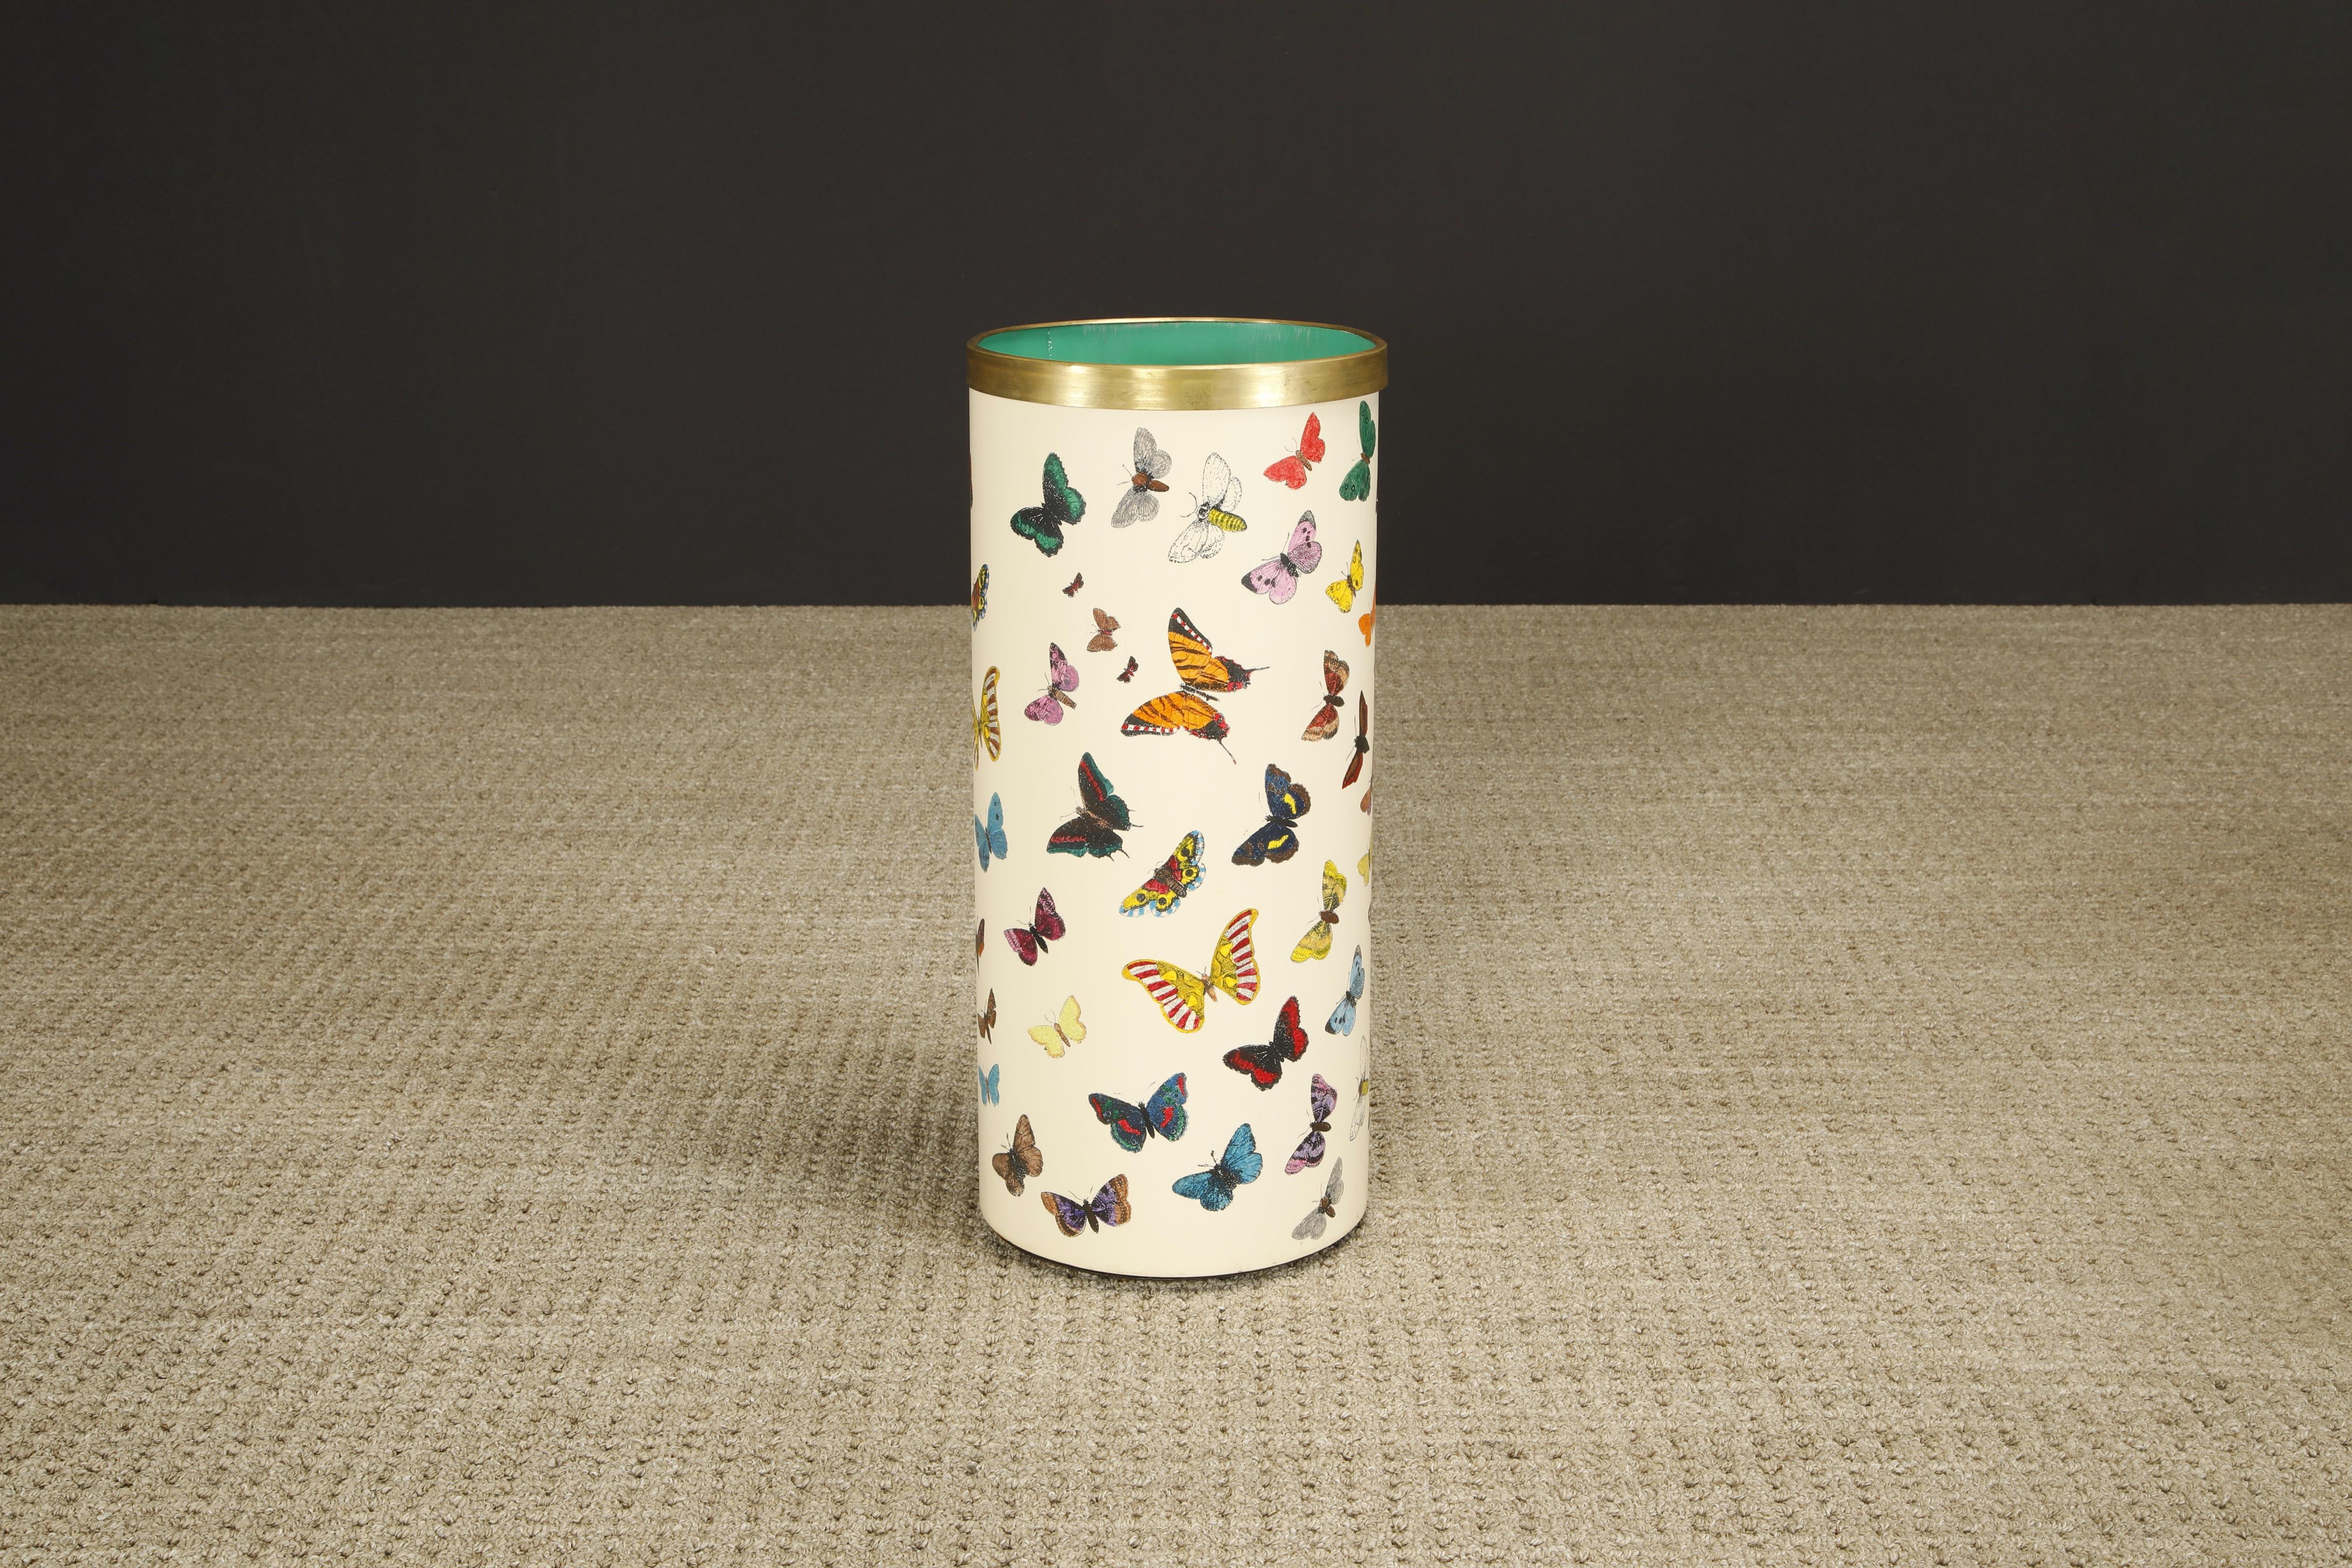 Mid-Century Modern 'Butterflies' Umbrella Stand by Piero Fornasetti, circa 1960s Italy, Signed  For Sale